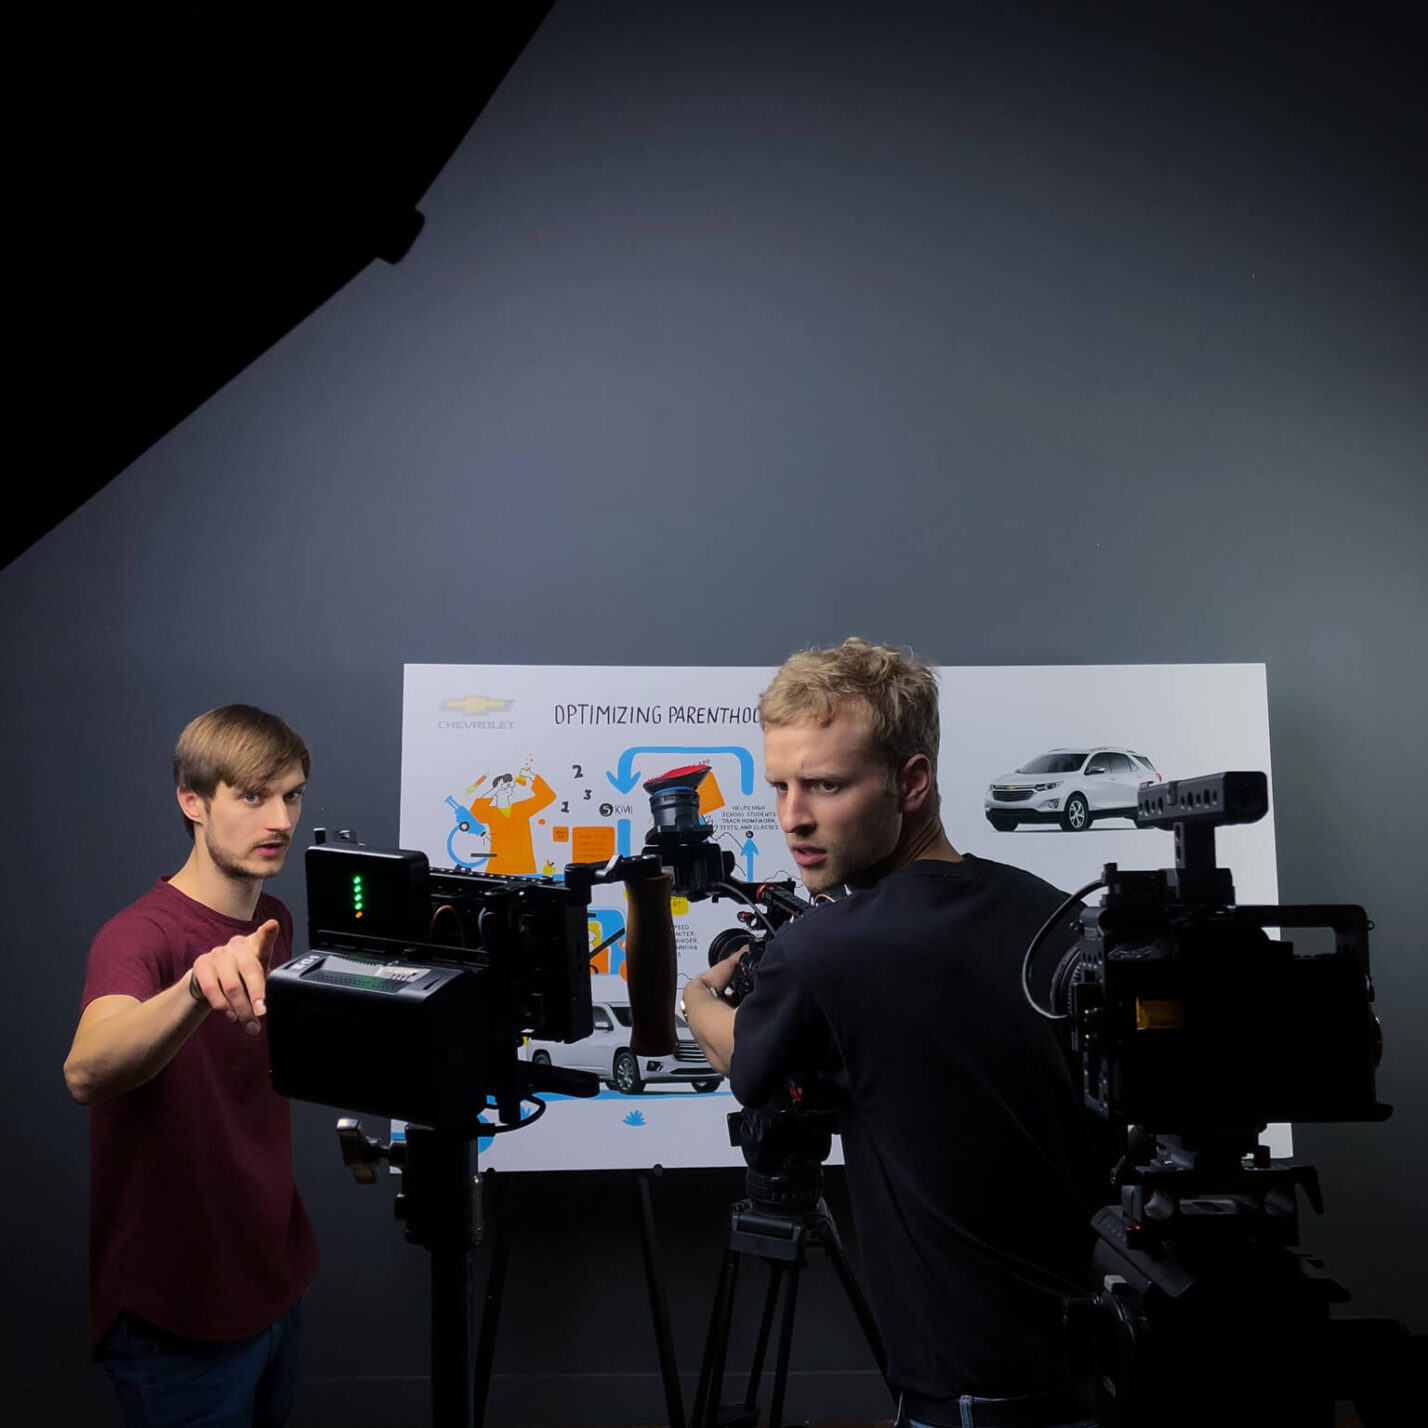 Live Scribing video production process by our videographers in London